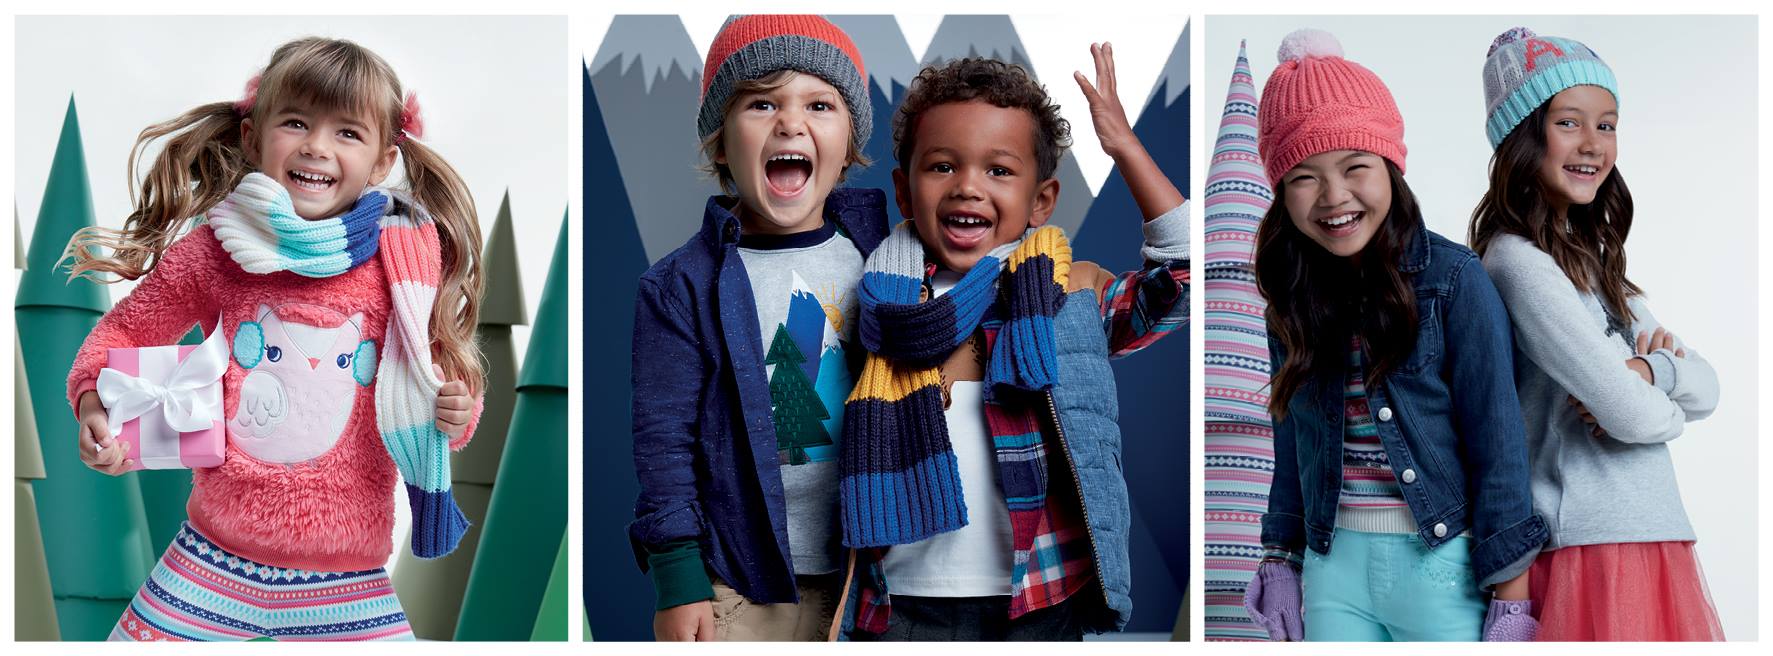 Today only: Gymboree kids’ apparel for $5 plus free shipping!